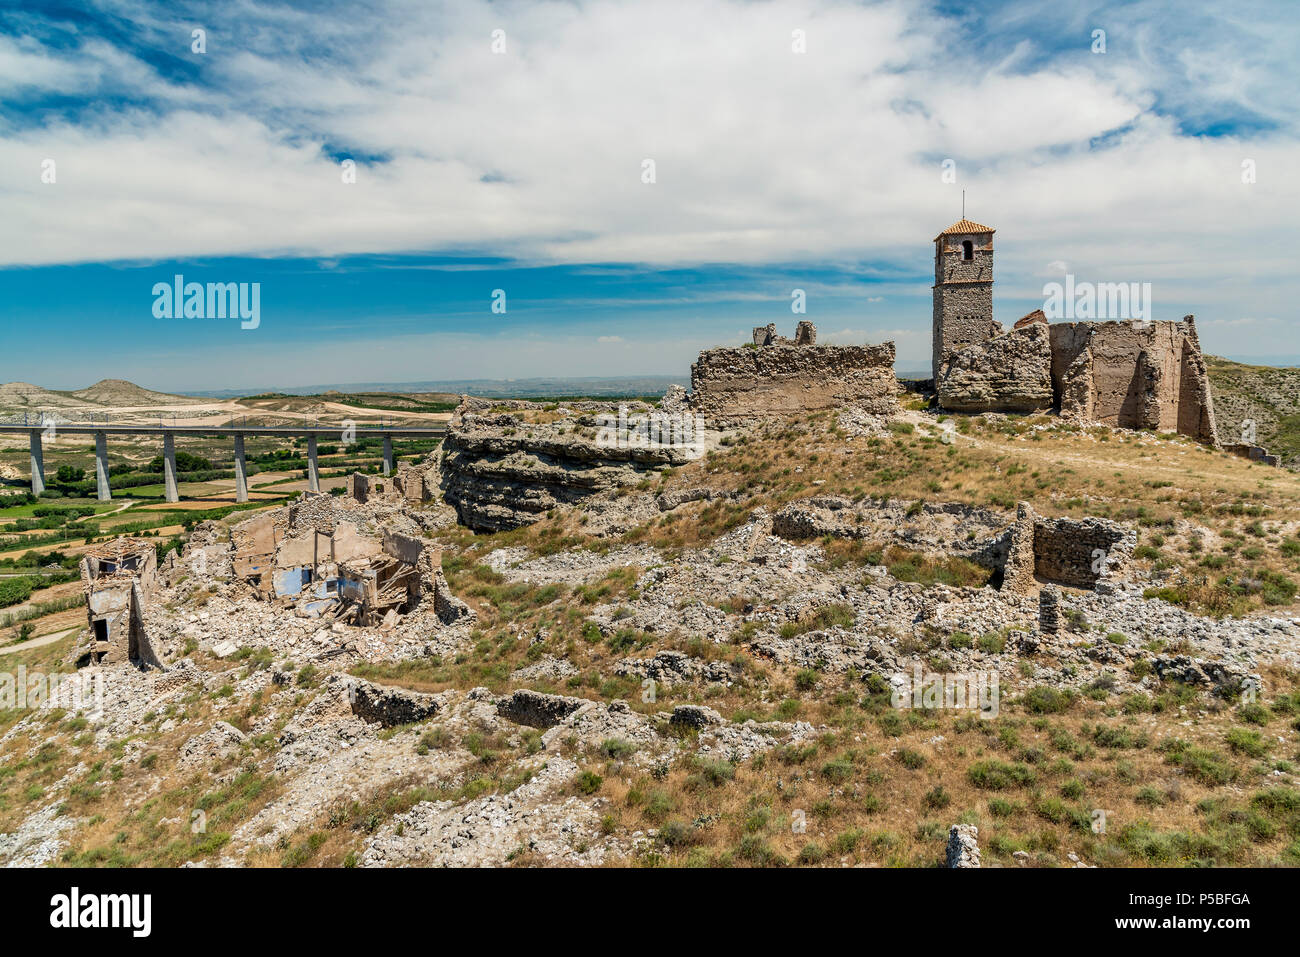 The preserved ruins of the abandoned old village as a result of the Spanish Civil War, Roden, Aragon, Spain Stock Photo